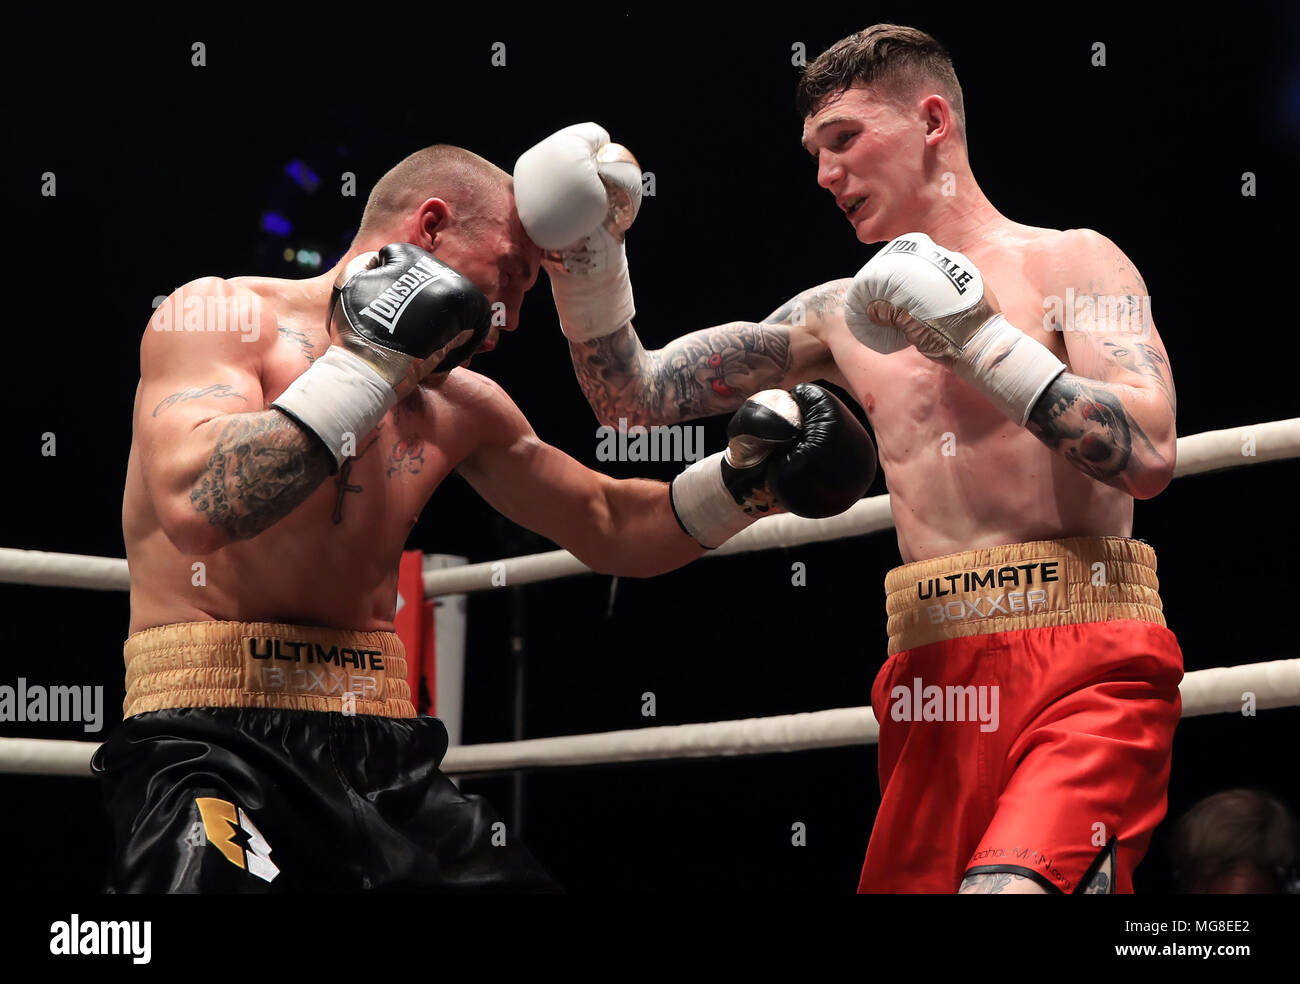 Drew Brown (right) and Sam Evans compete in Semi Final 1 of the Ultimate Boxxer competition at the M.E.N. Arena, Manchester. Stock Photo